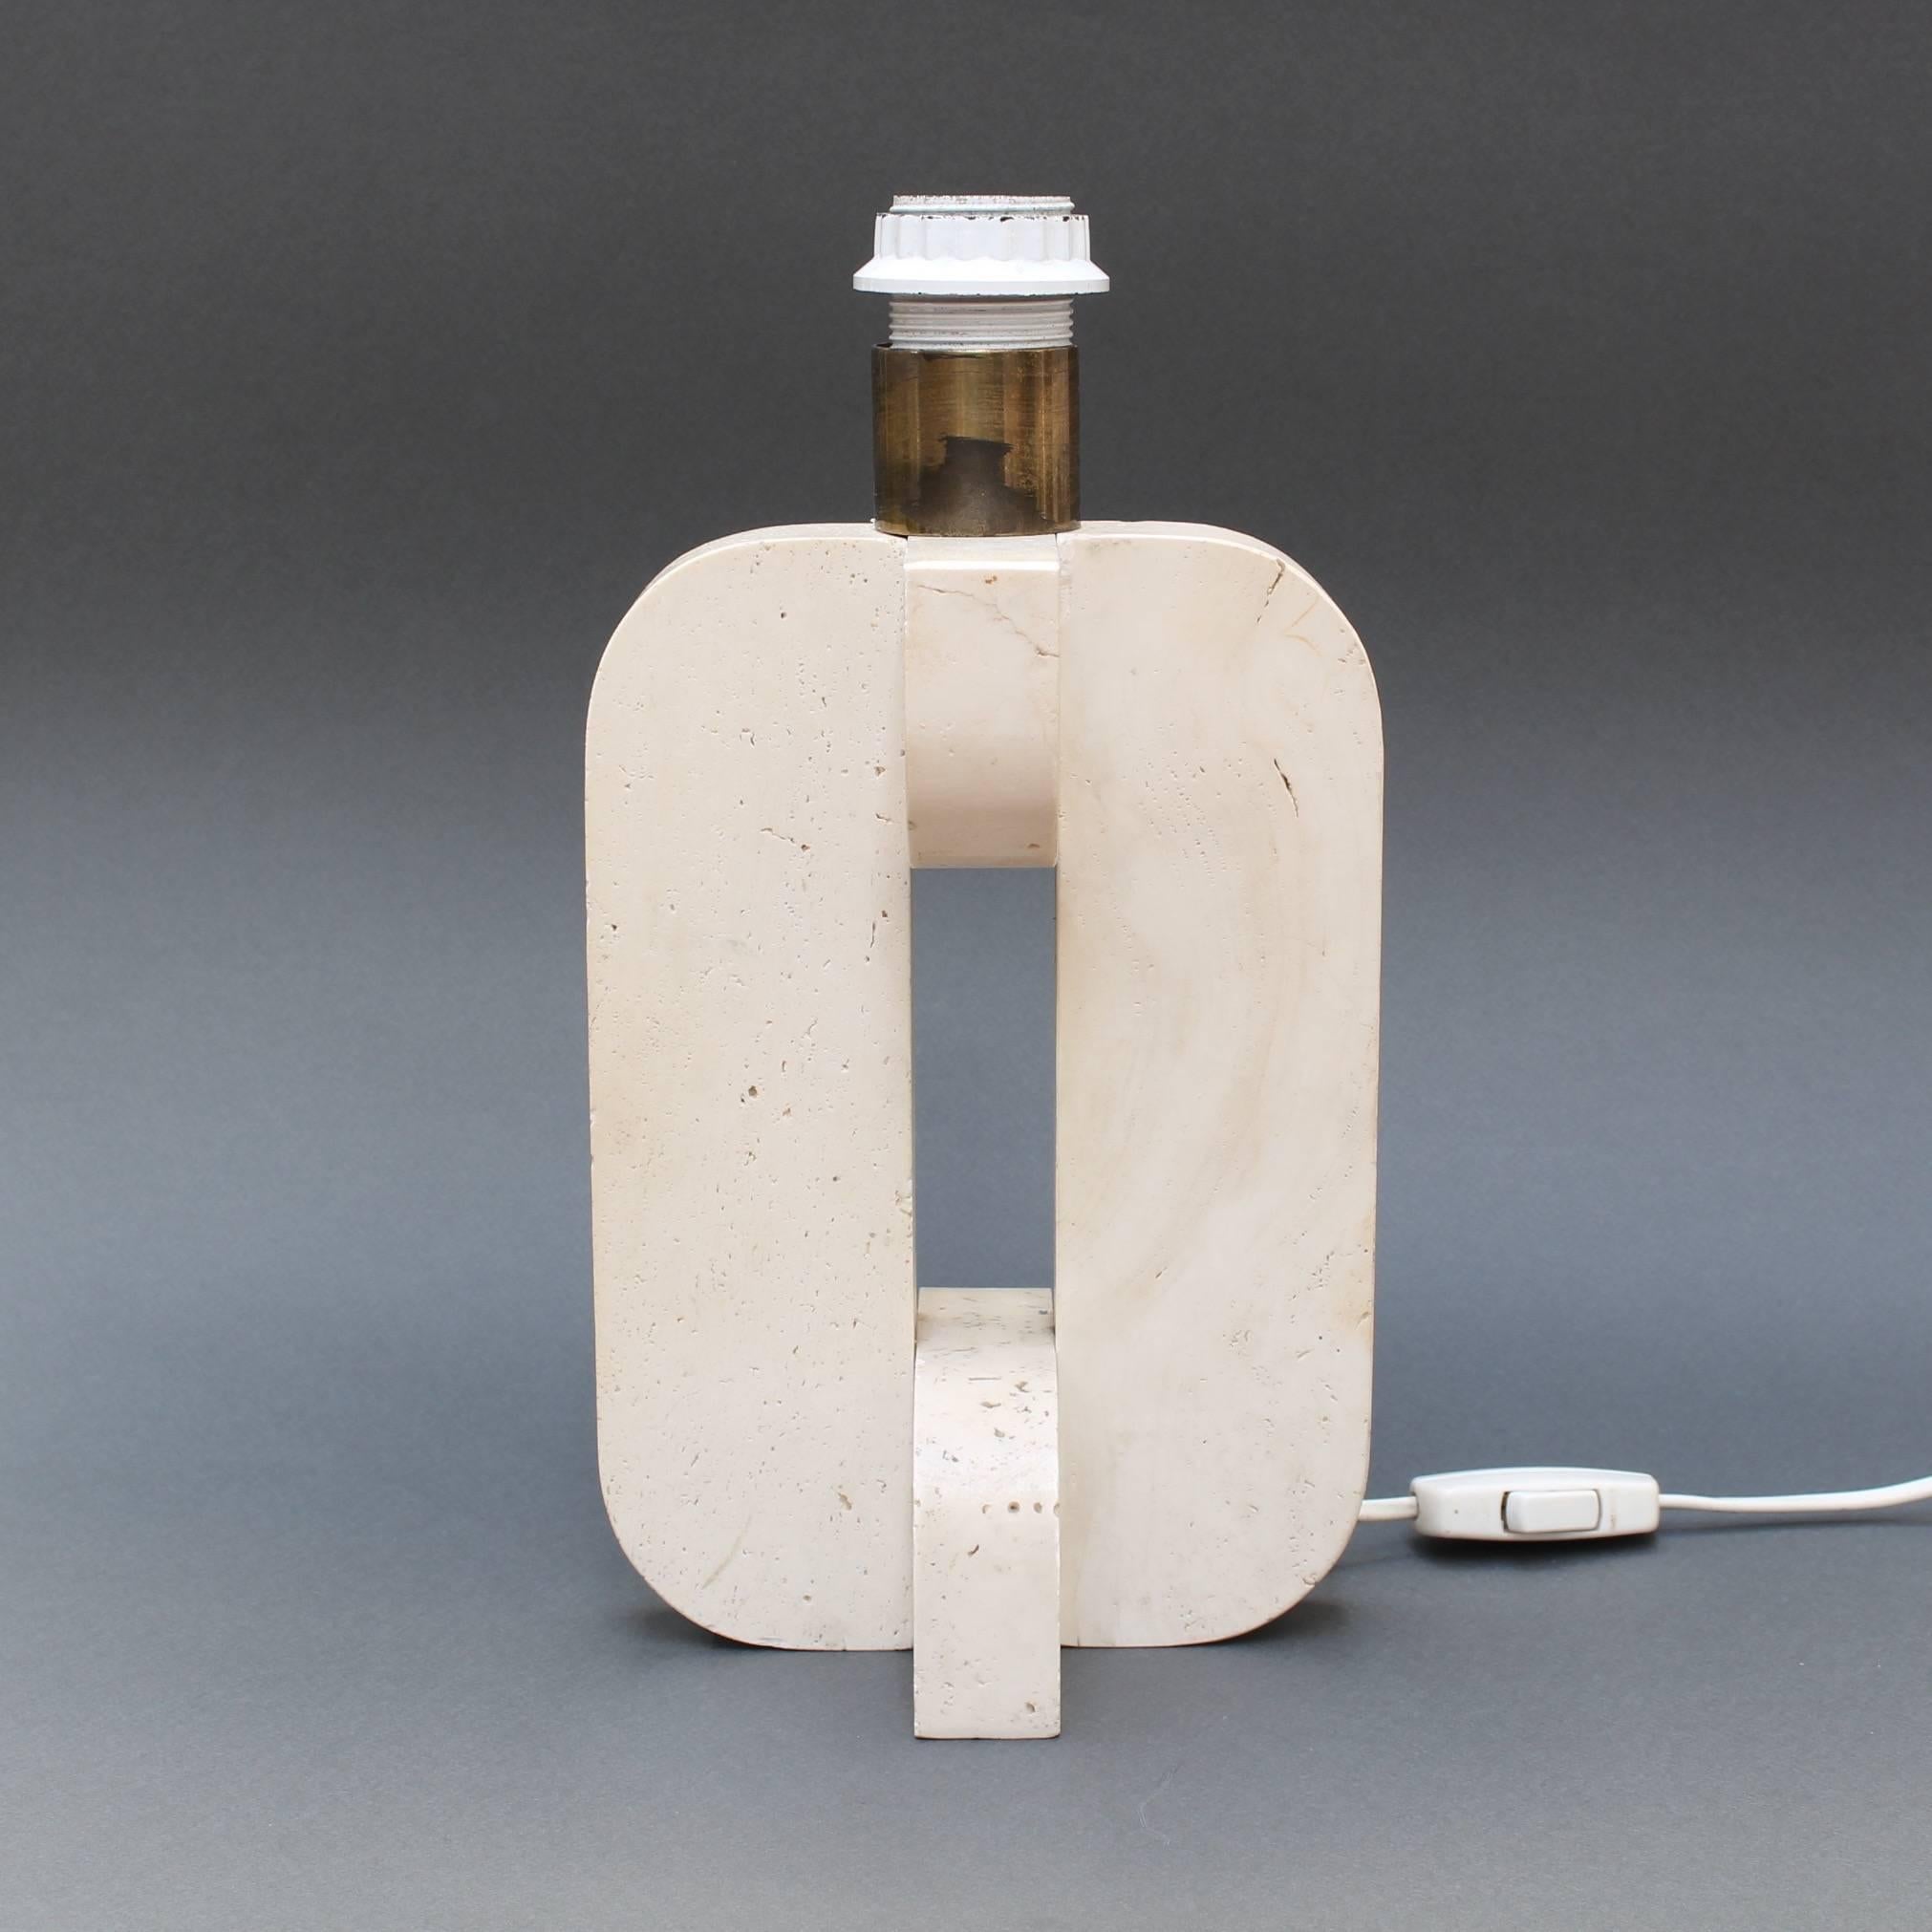 Classic Italian Travertine table lamp (c. 1960s) with flattened oval body and structural geometric cross-sections. Inspired by cubist art, this lamp has a subtle limestone coloured base. Lampshade included. Currently wired for European usage.